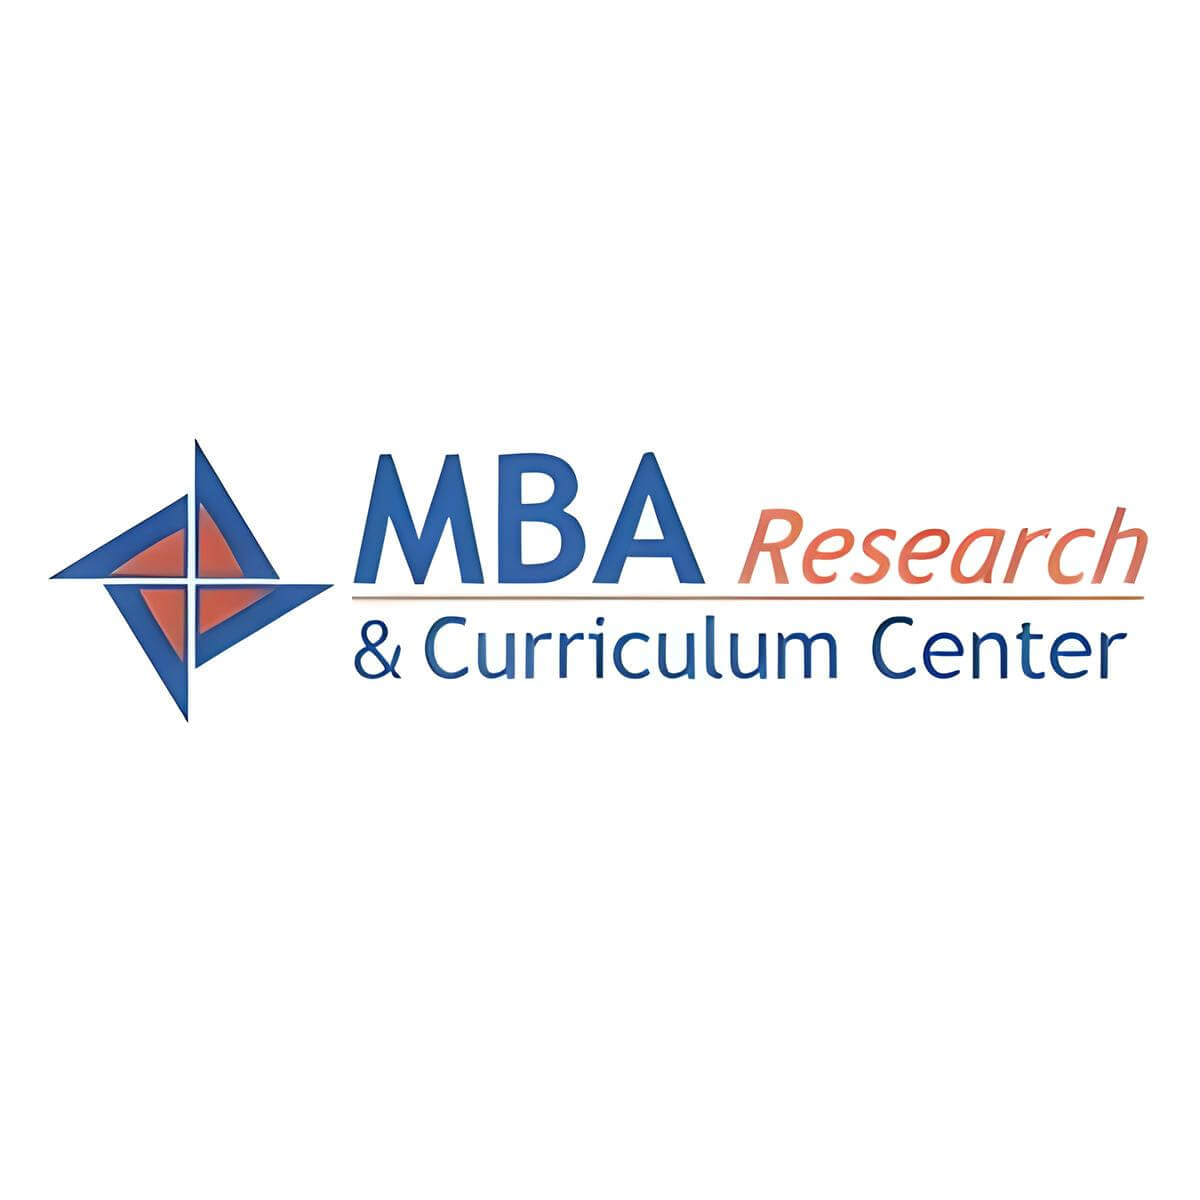 MBA Research